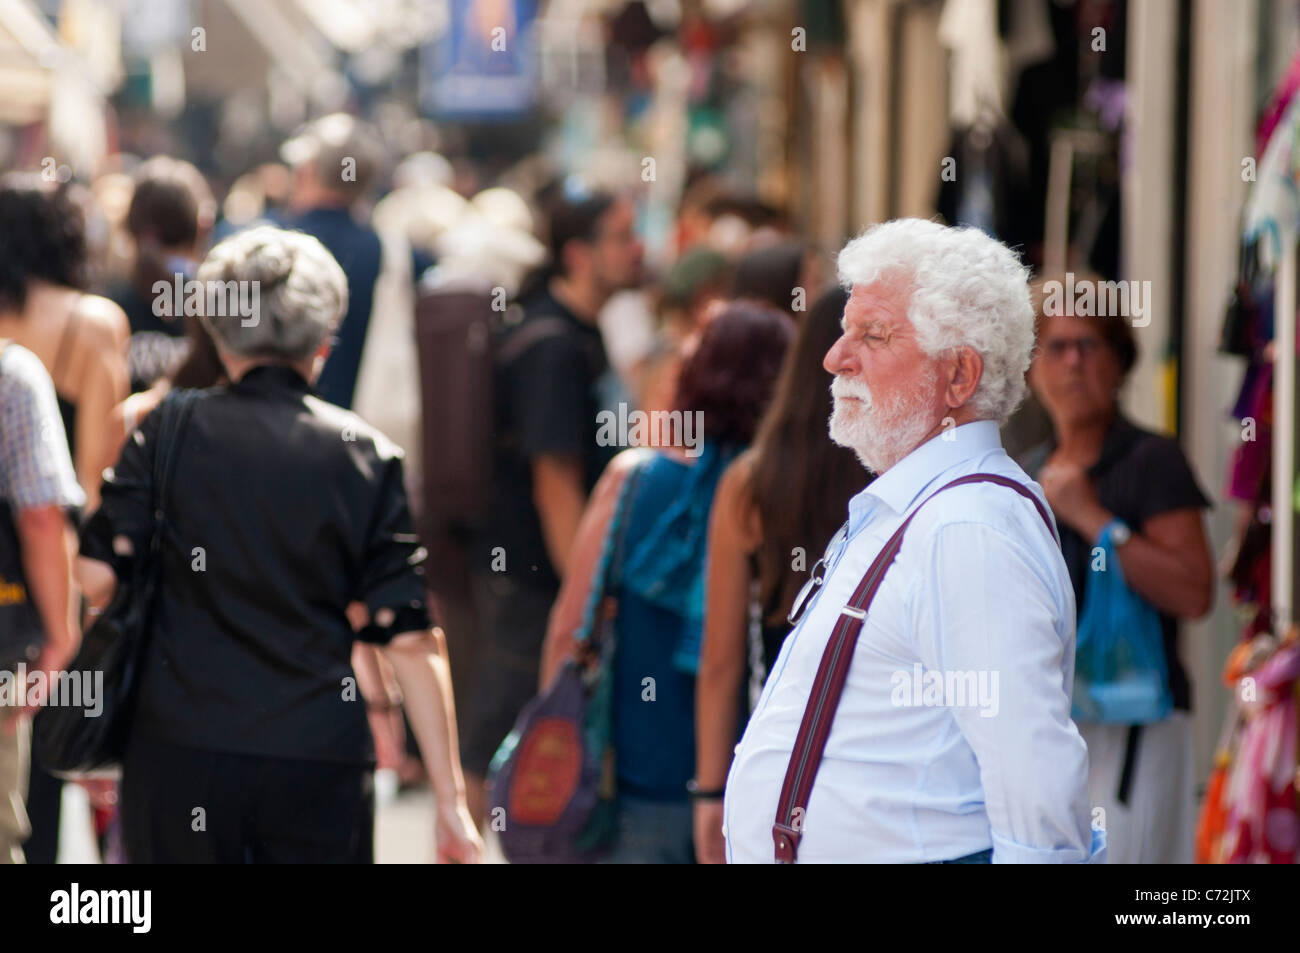 A local shop keeper looks on in busy shopping streets of Plaka, Athens, Greece. Stock Photo